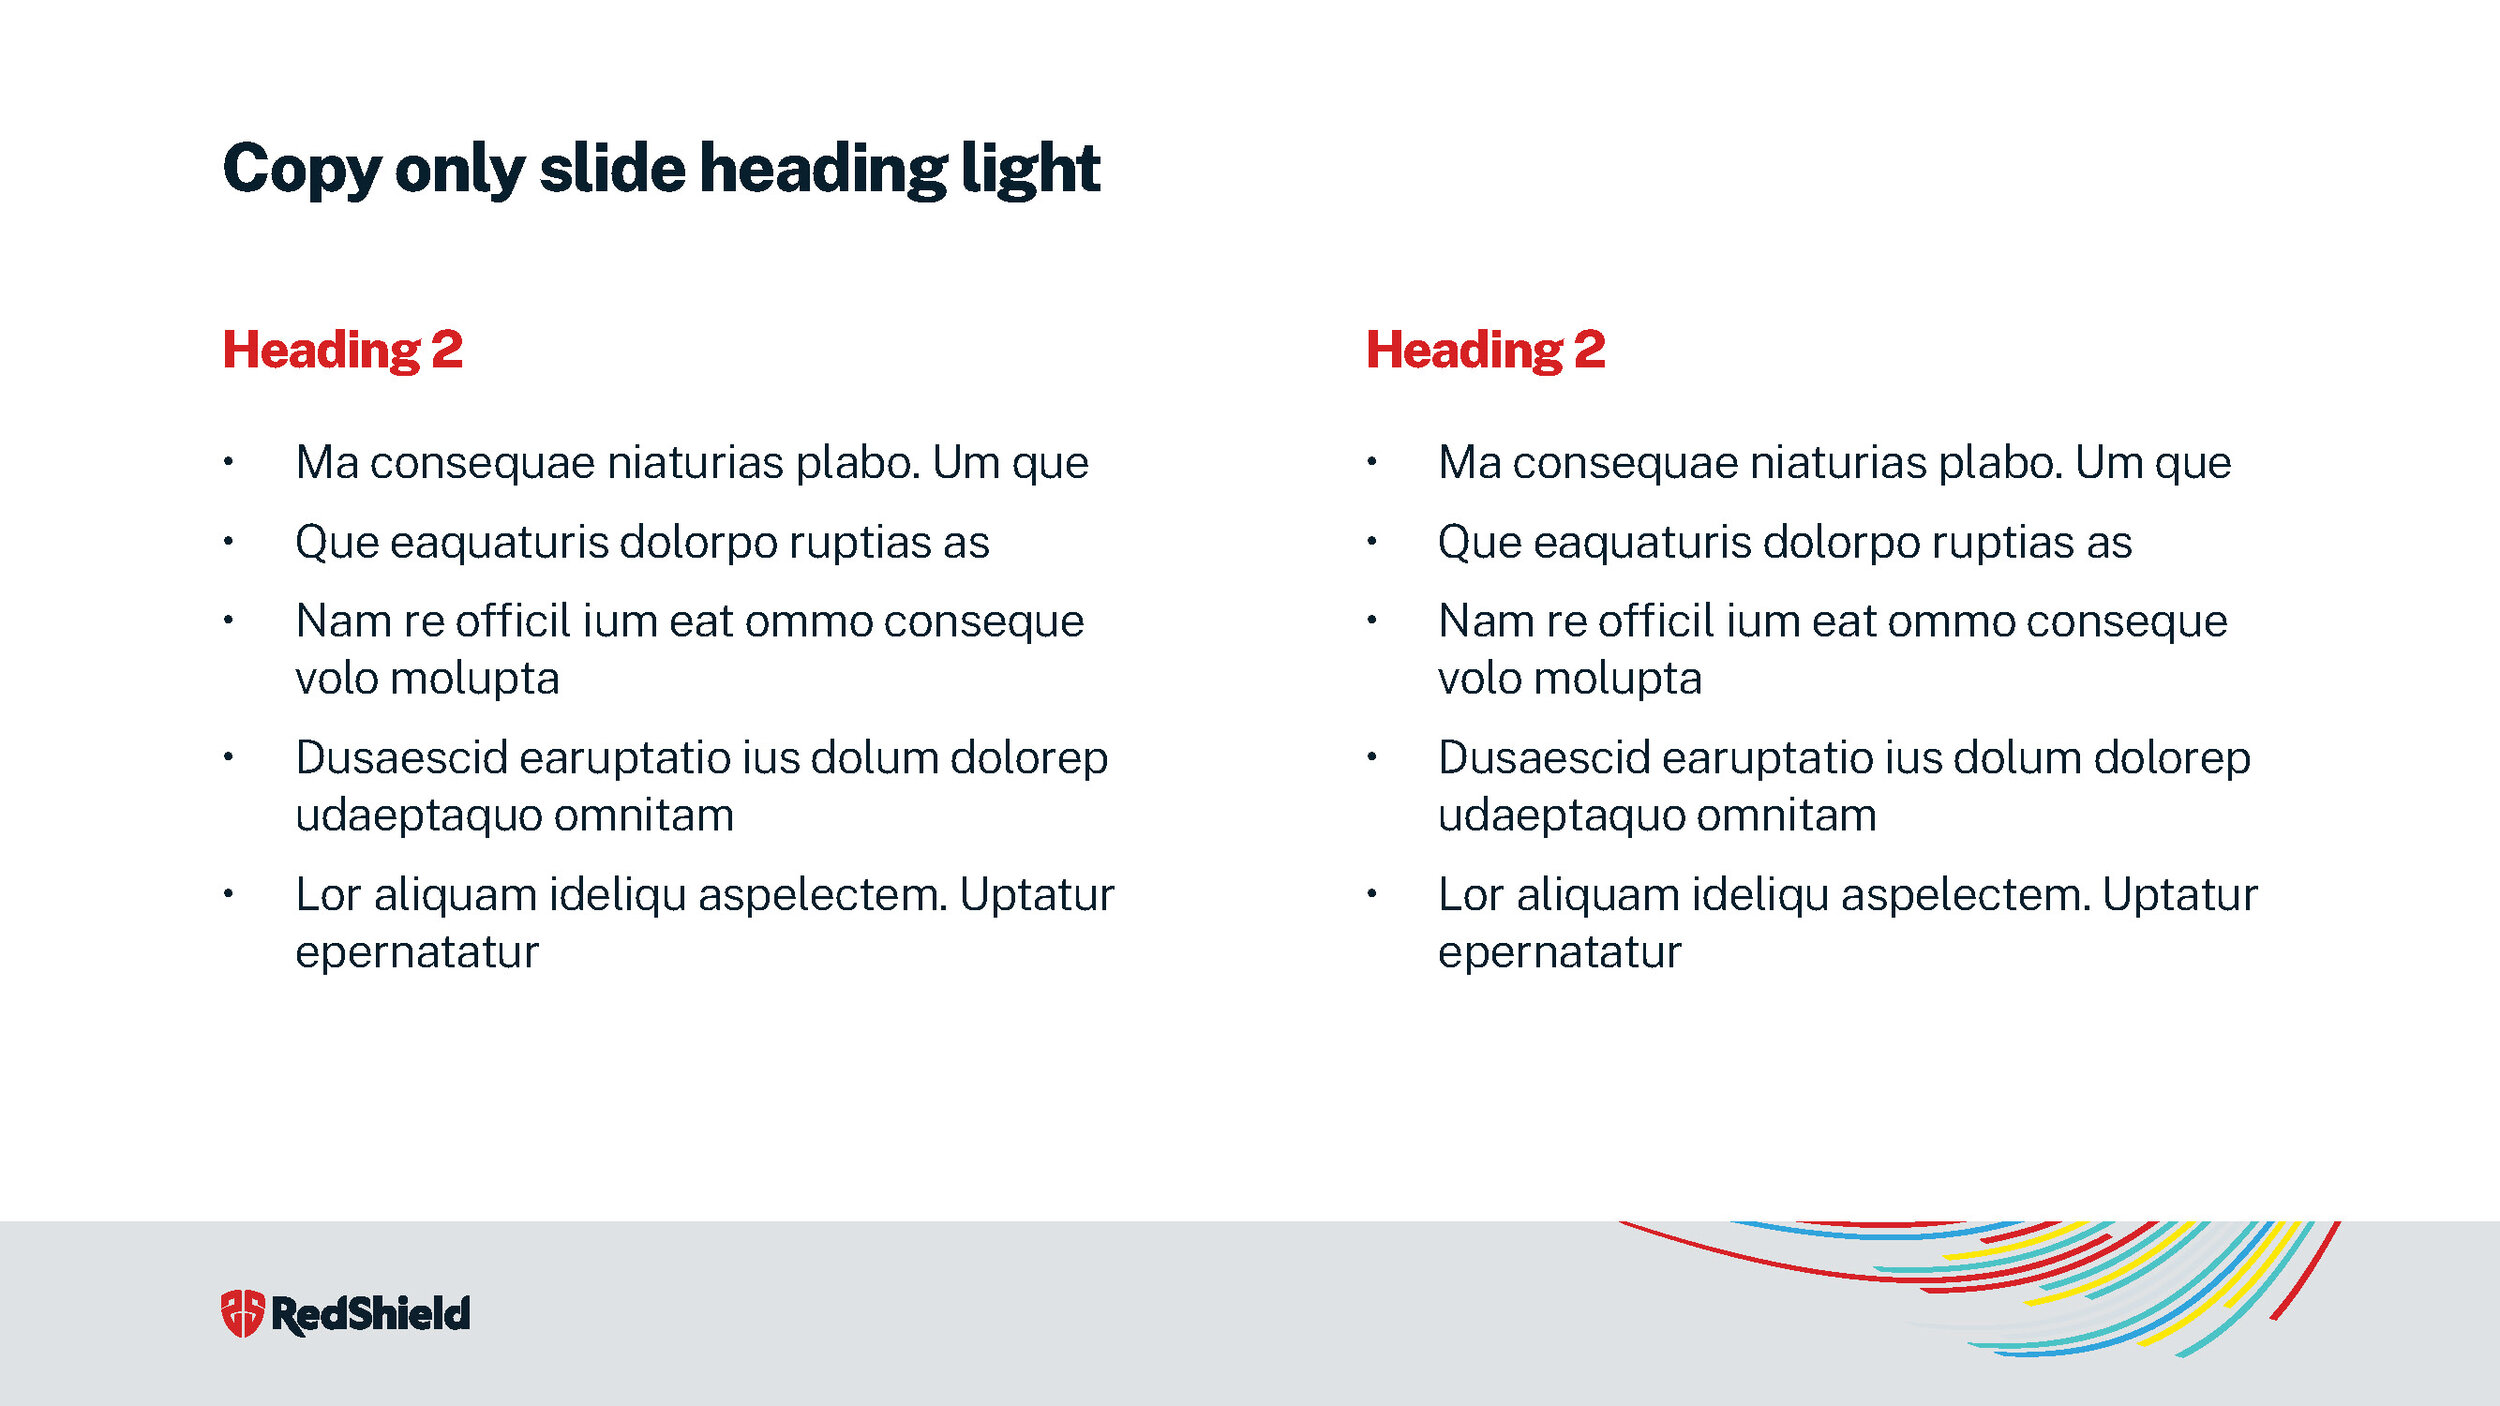 RedShield_PPT Template_Page_08.jpg